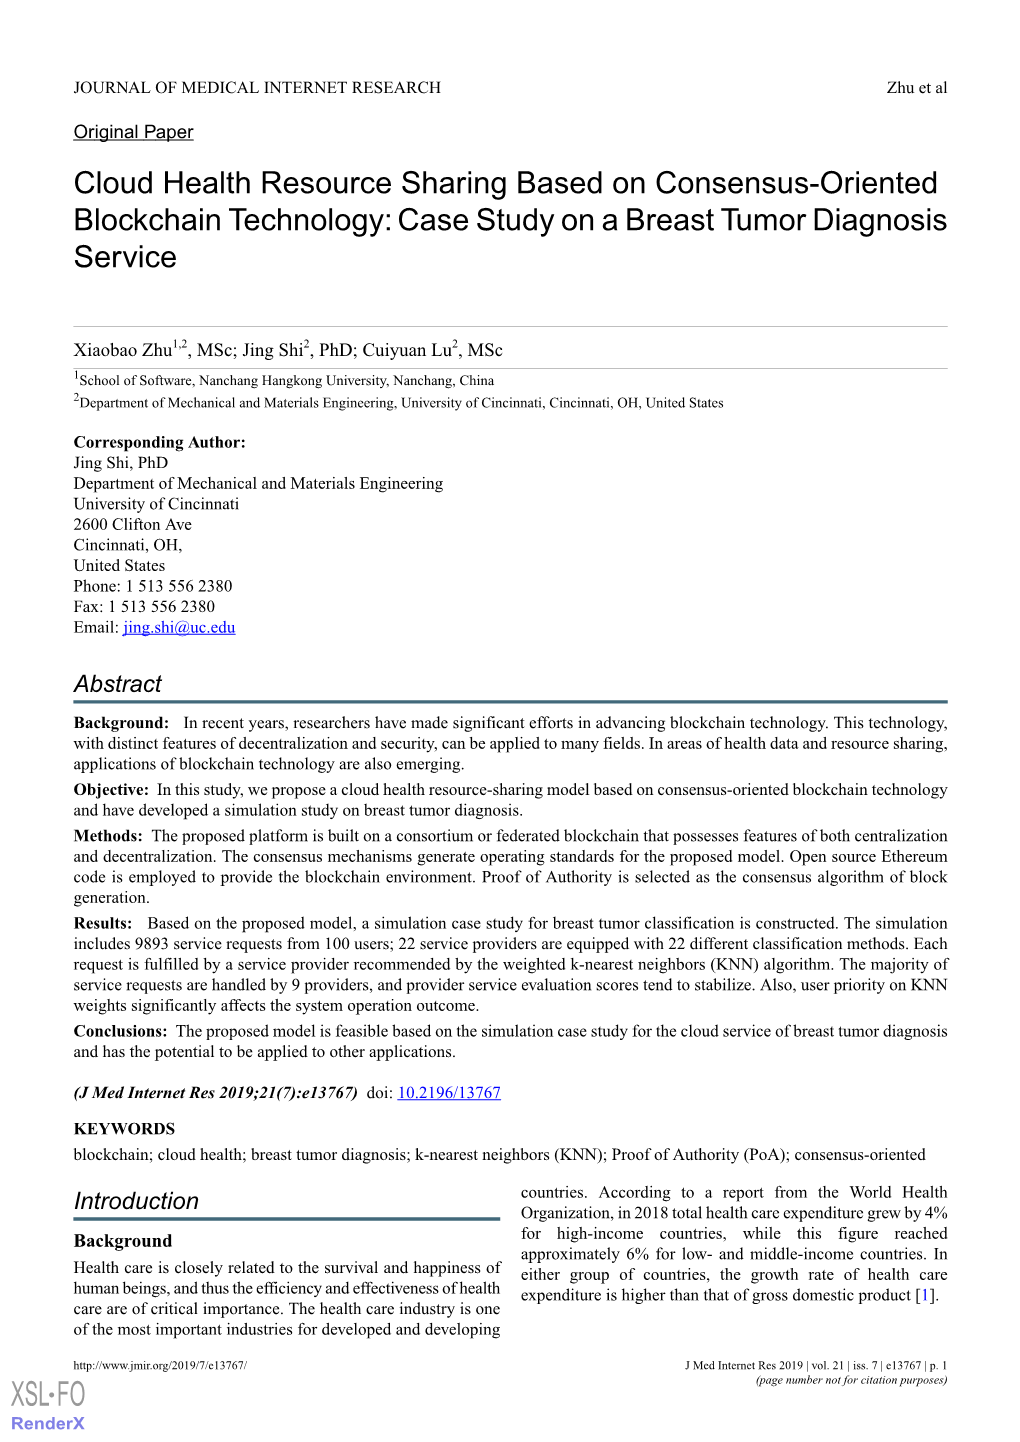 Cloud Health Resource Sharing Based on Consensus-Oriented Blockchain Technology: Case Study on a Breast Tumor Diagnosis Service